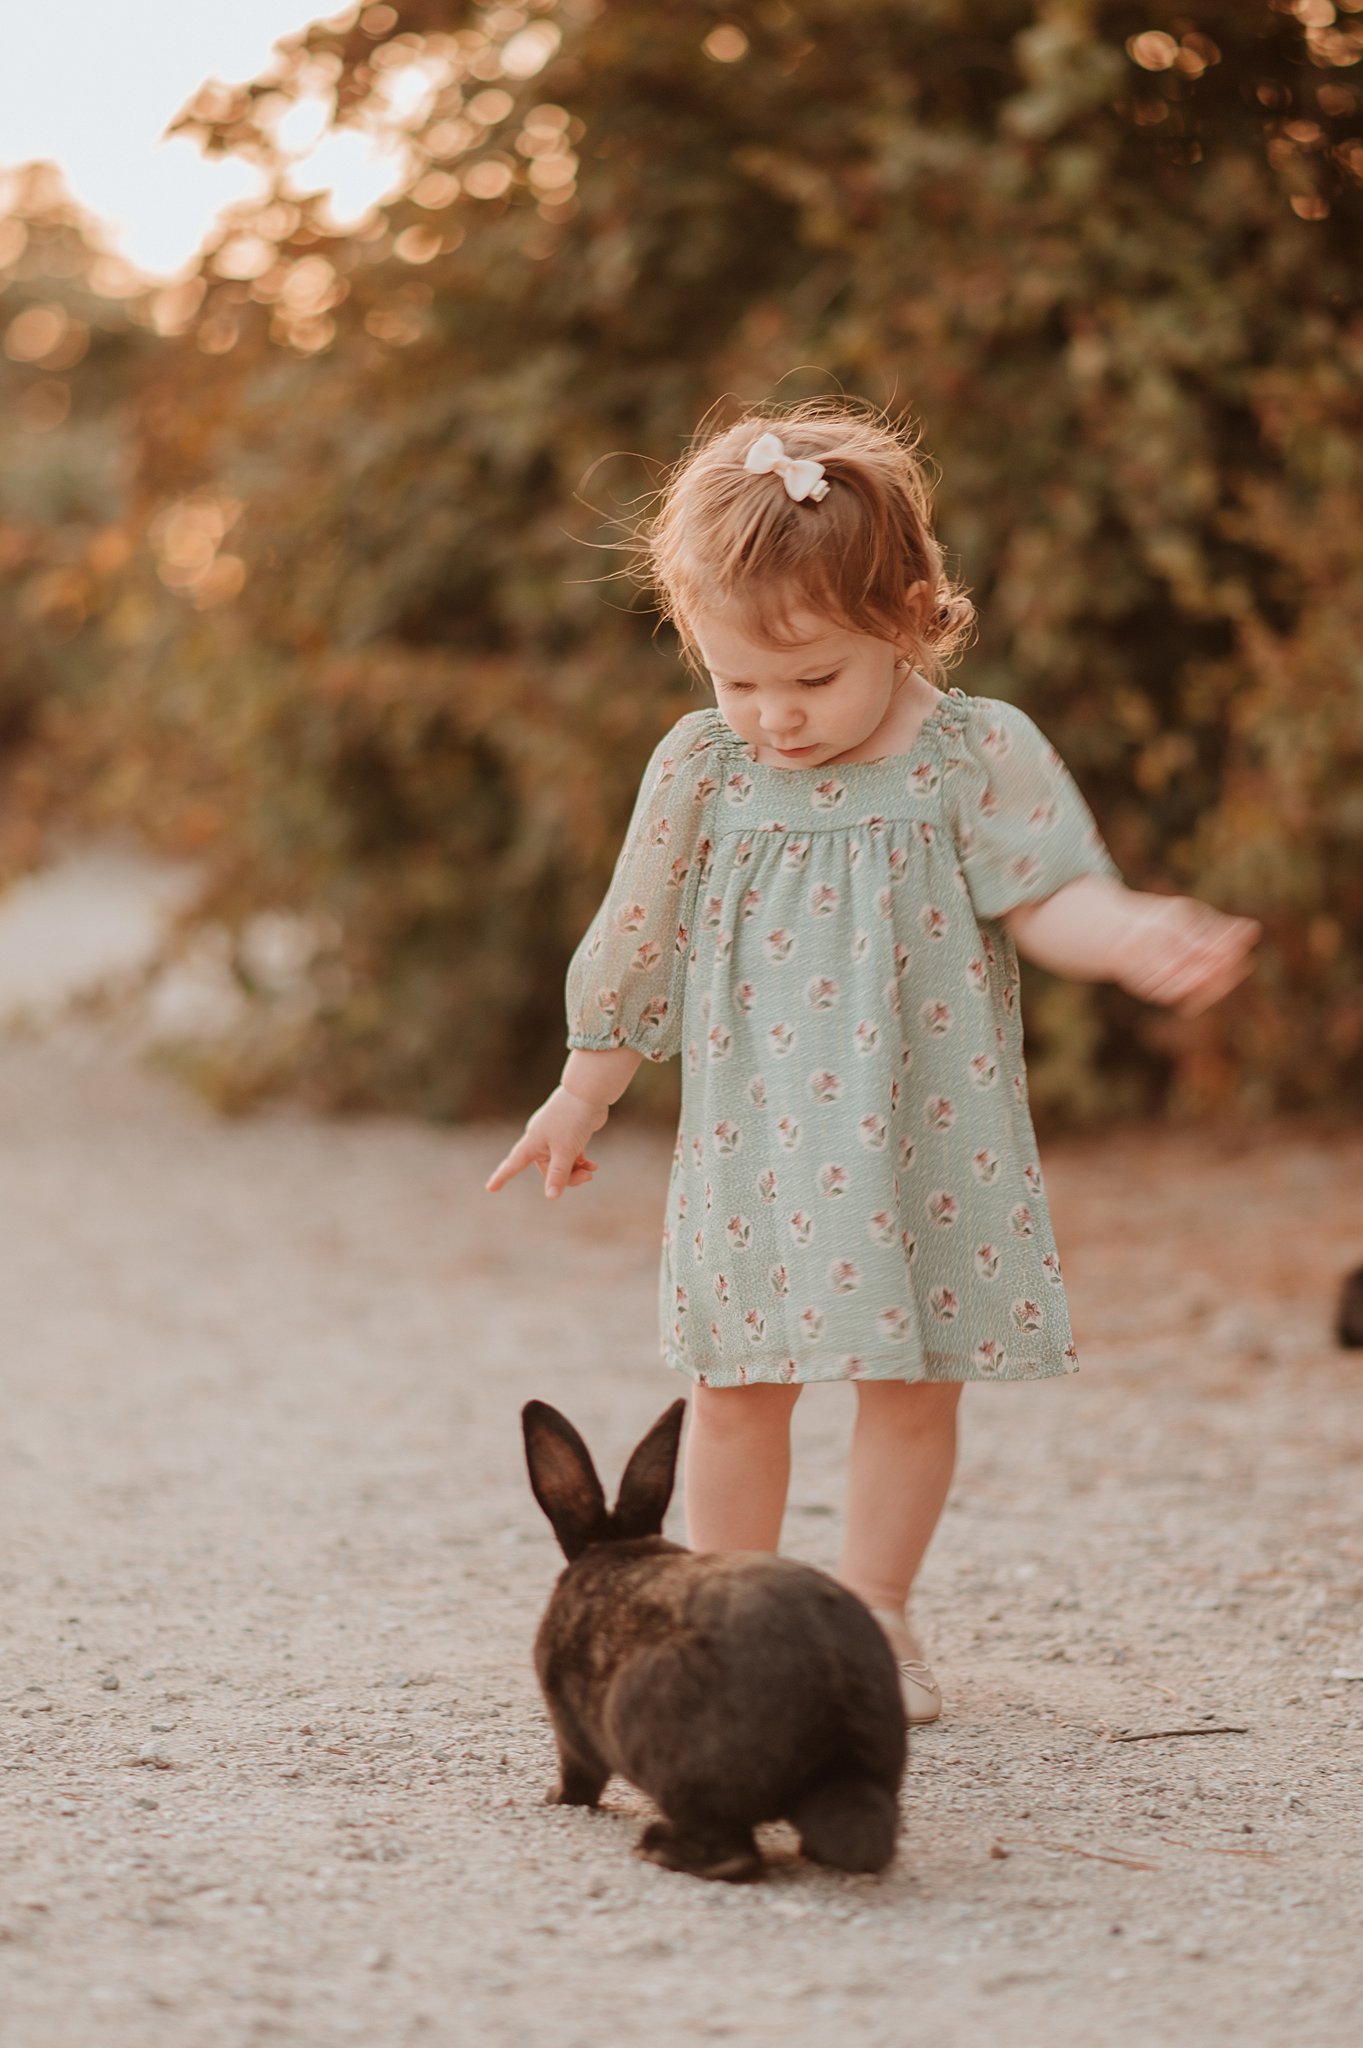 A young toddler girl plays with a bunny in a green dress in a park at sunset during baby activities vancouver